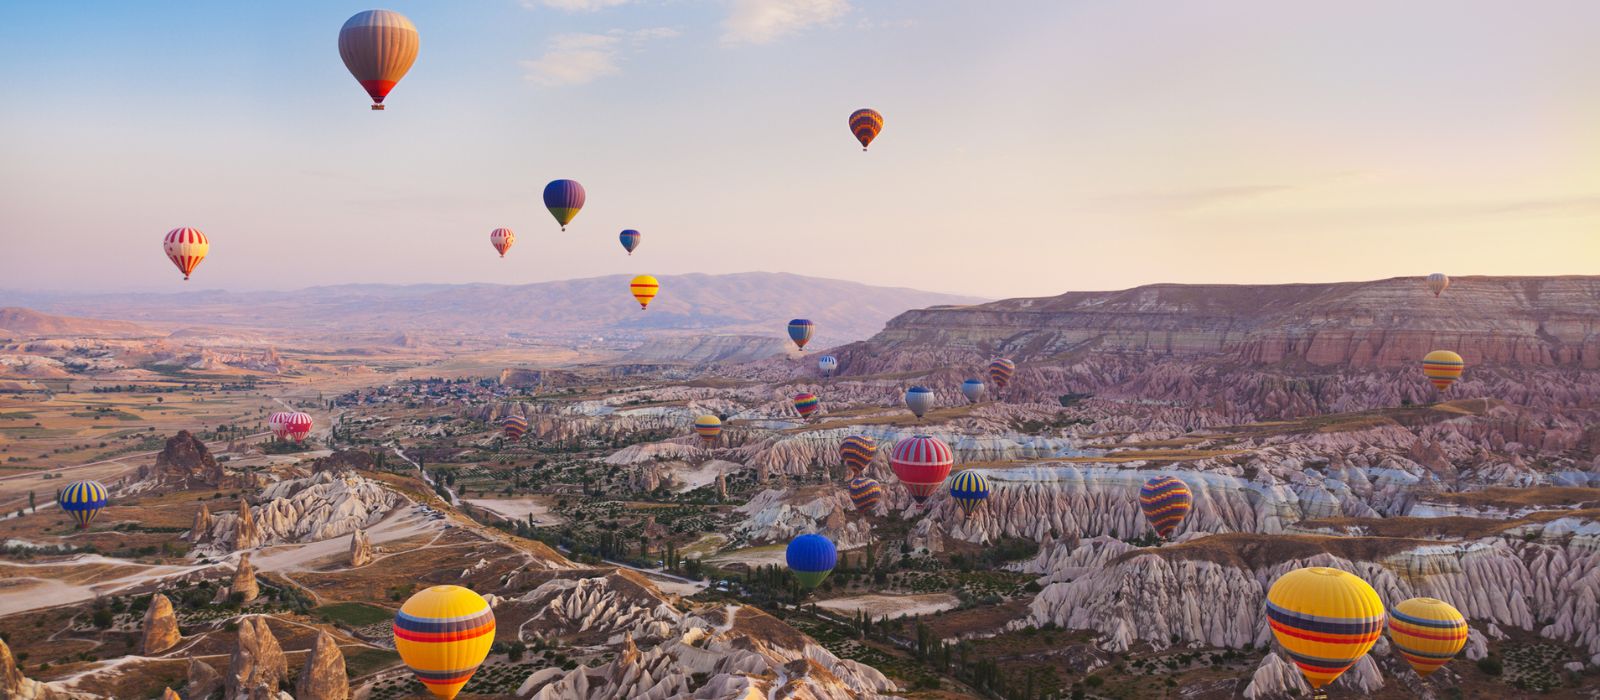 Turkey Holiday Packages | Turkey Tour Packages From India